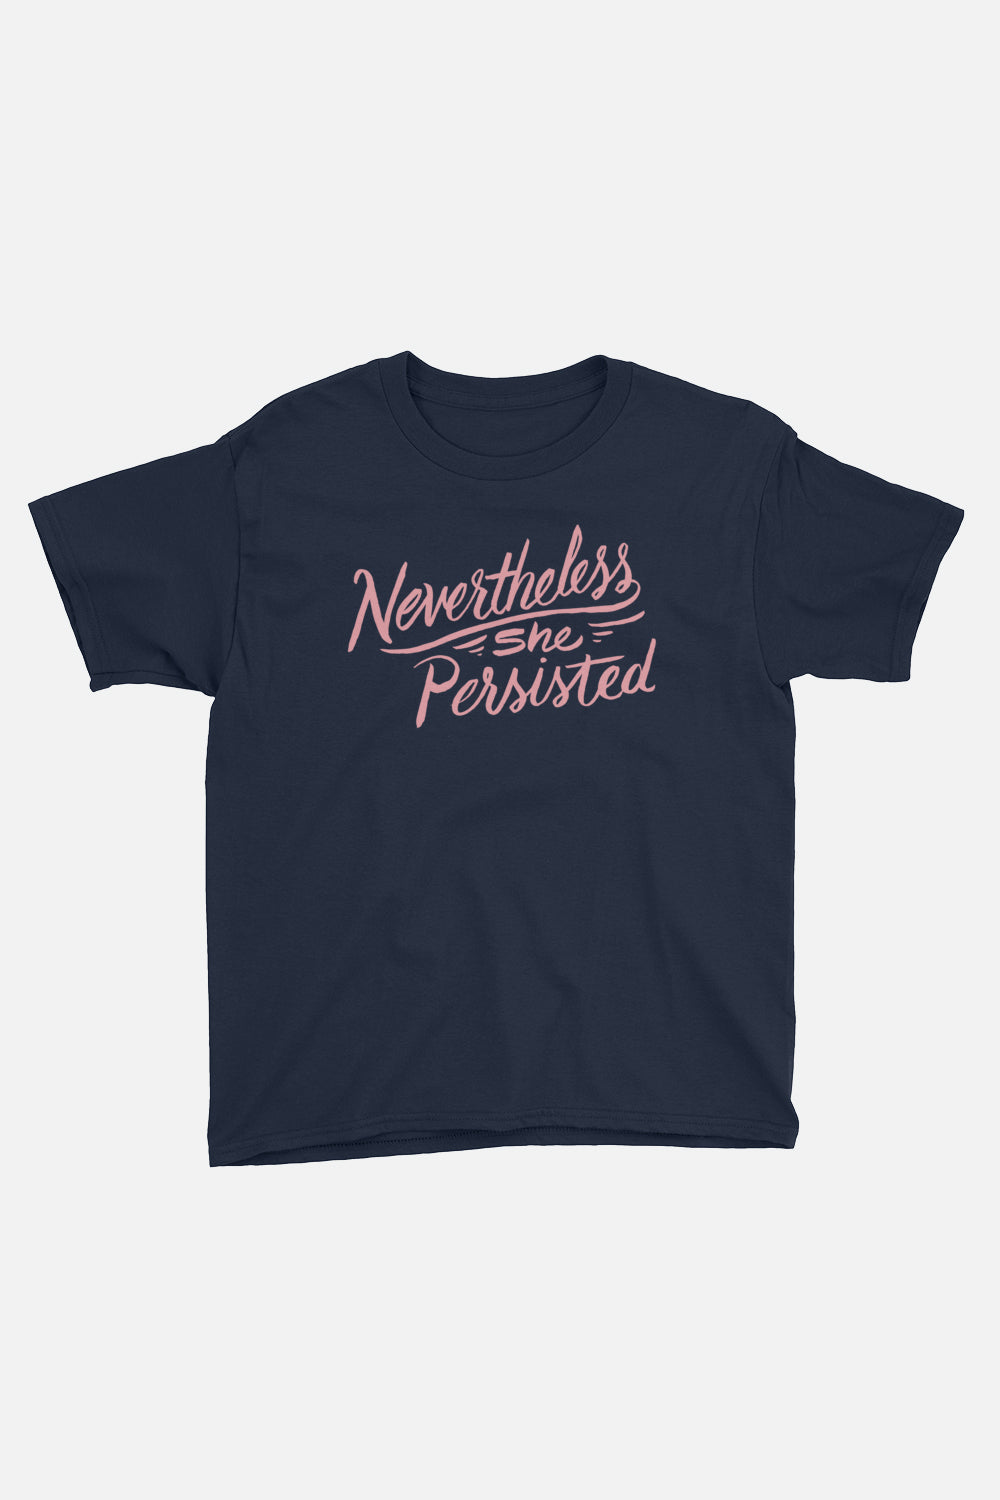 Nevertheless, She Persisted Kids Tee